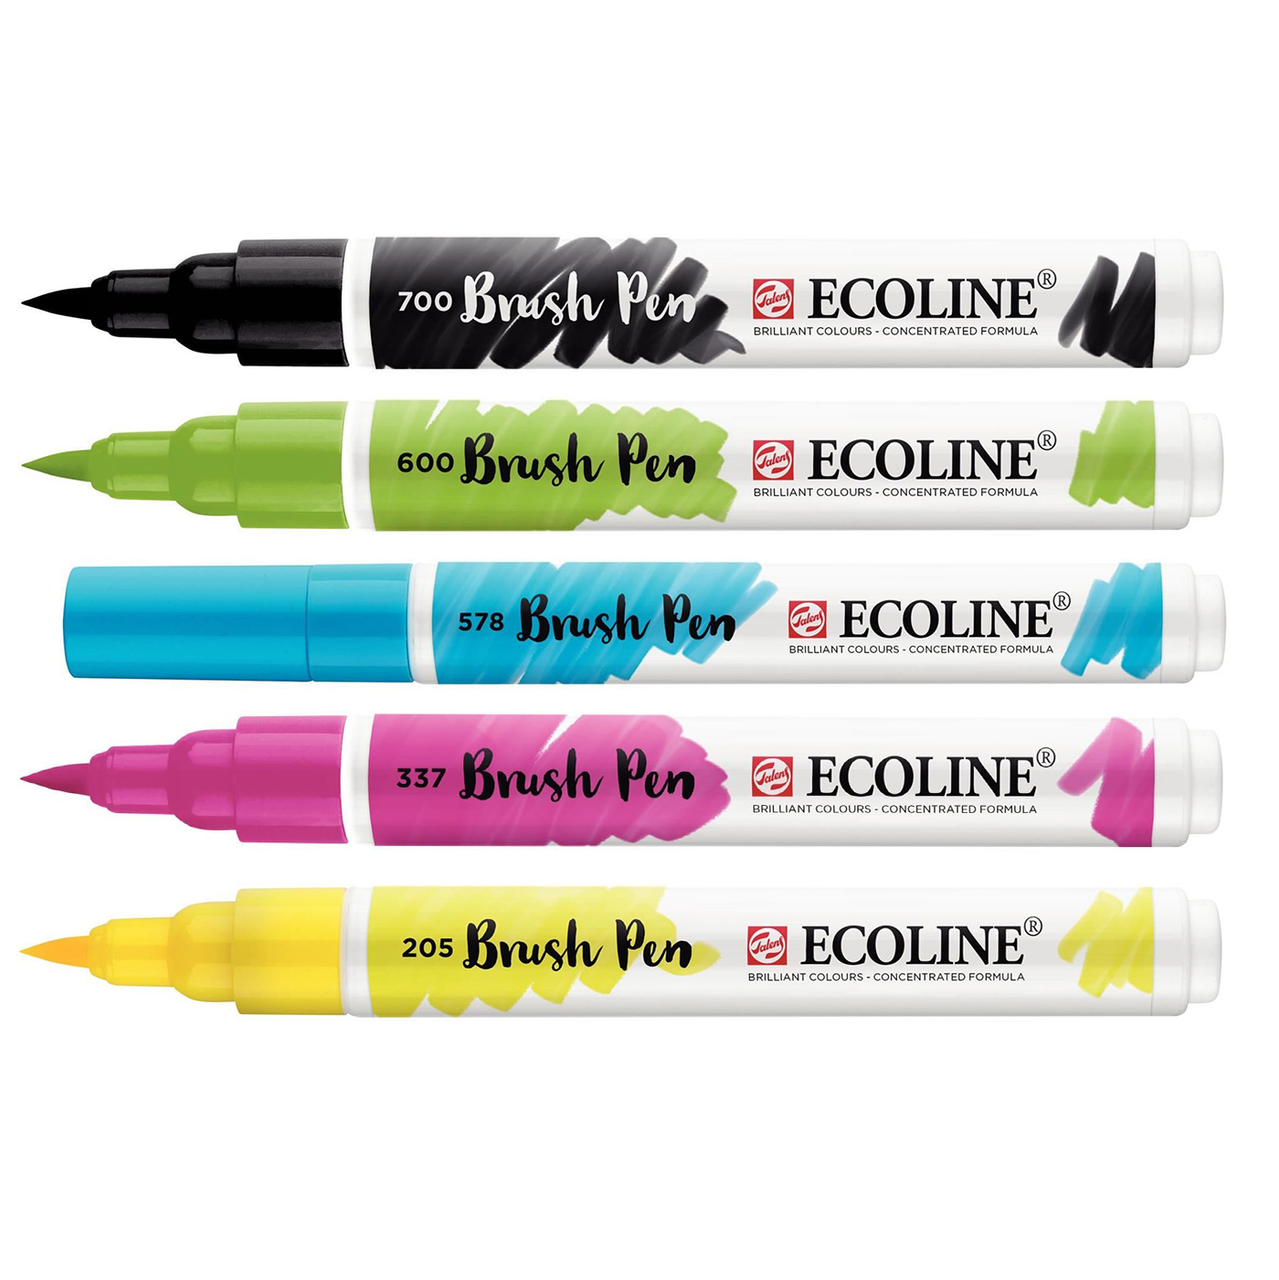 Pastel ecoline brush pen set with 10 calligraphy watercolor pens